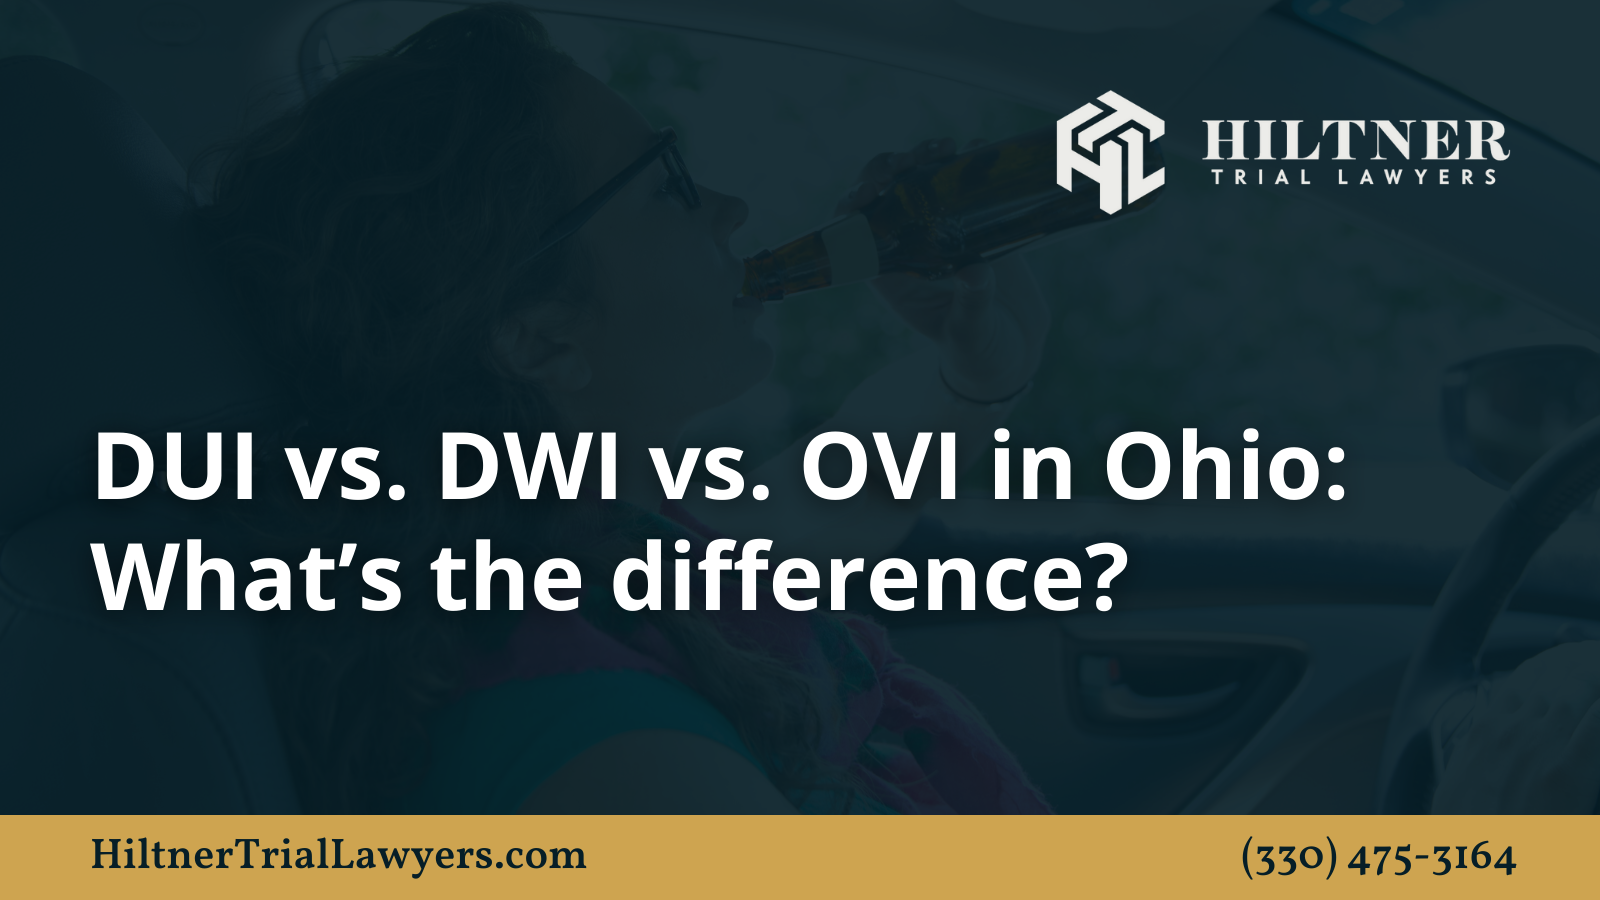 DUI vs. DWI vs. OVI: What’s the difference?